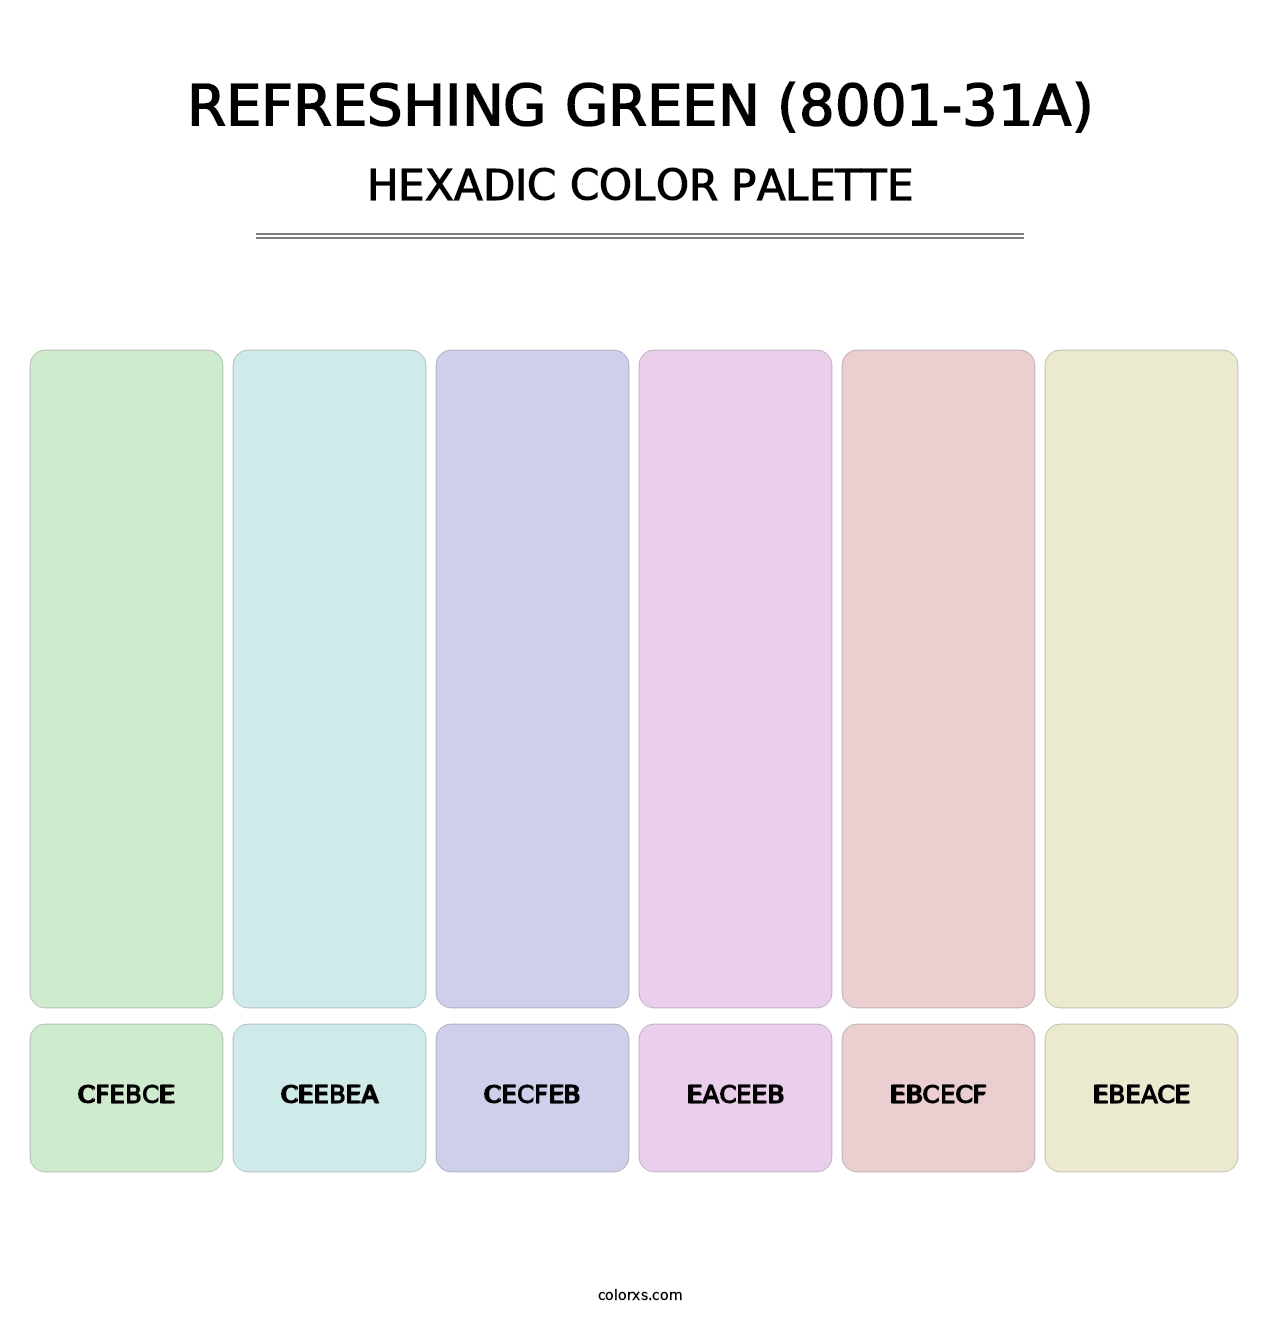 Refreshing Green (8001-31A) - Hexadic Color Palette